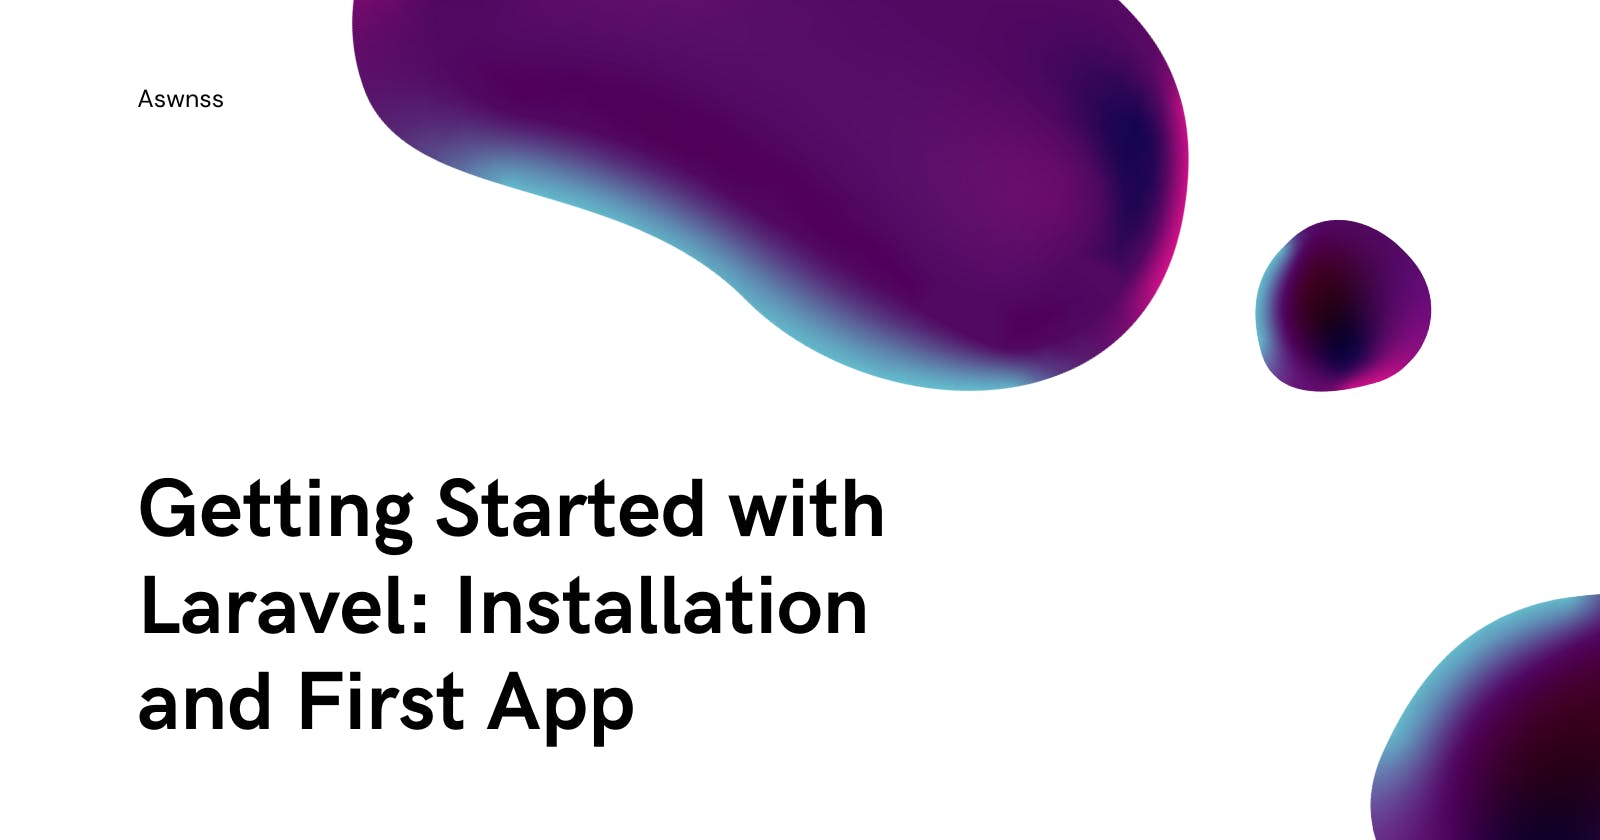 Getting Started with Laravel: Installation and First App